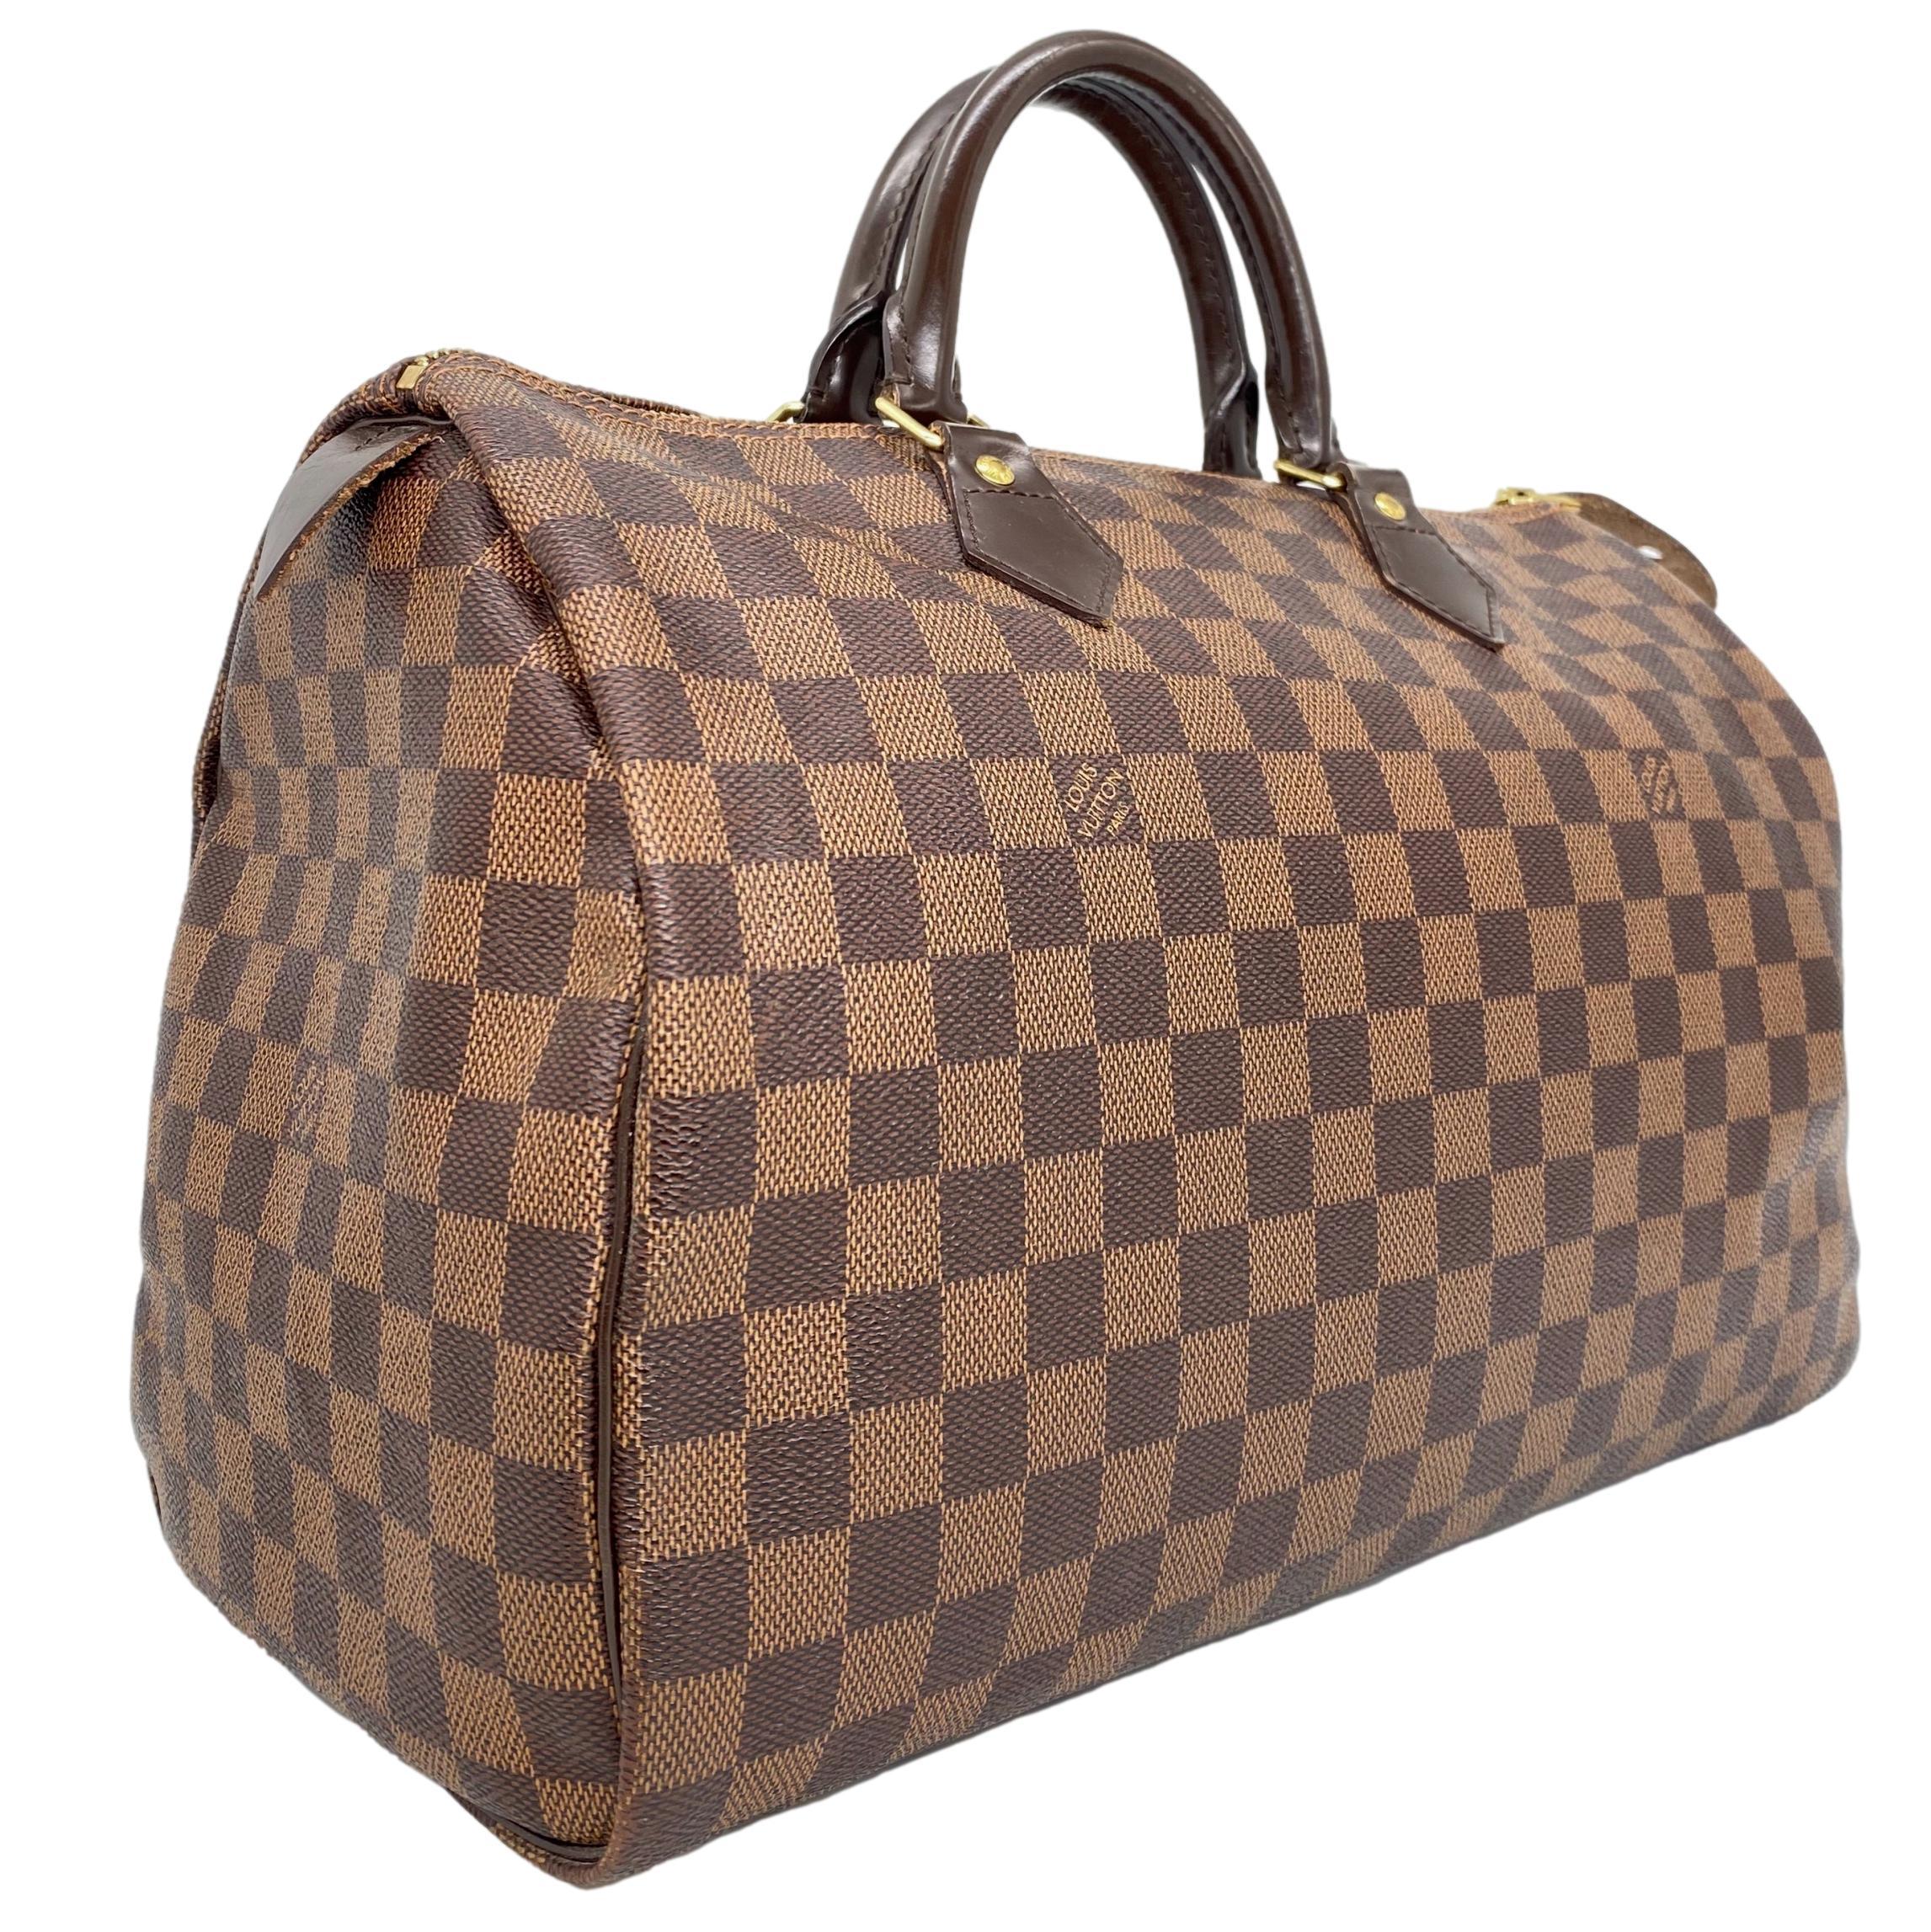 Louis Vuitton Damier Ebene Speedy 35 Top Handle Bag, France 2011. This iconic speedy was first introduced in the 1930's and was designed as an alternative for the larger 